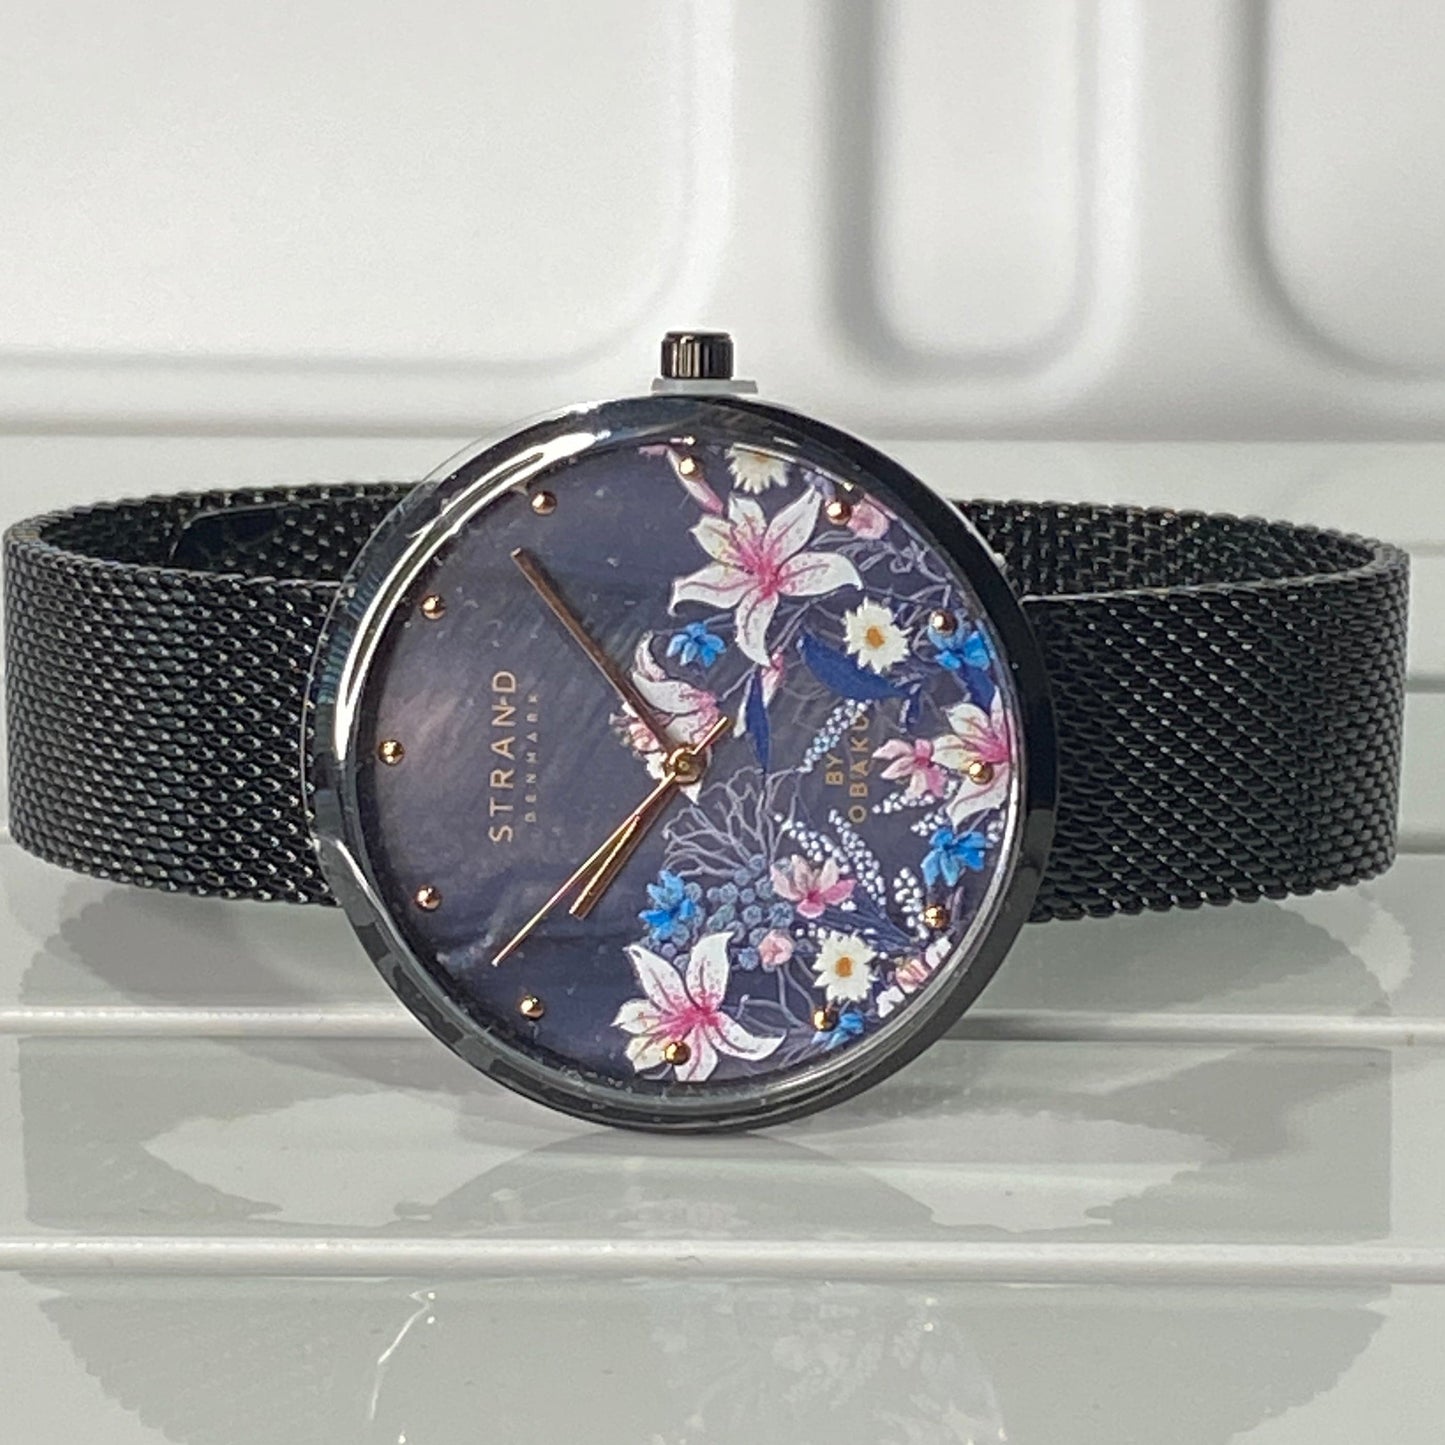 Floral Ladies Watch from STRAND - Black Multi Mesh Strap